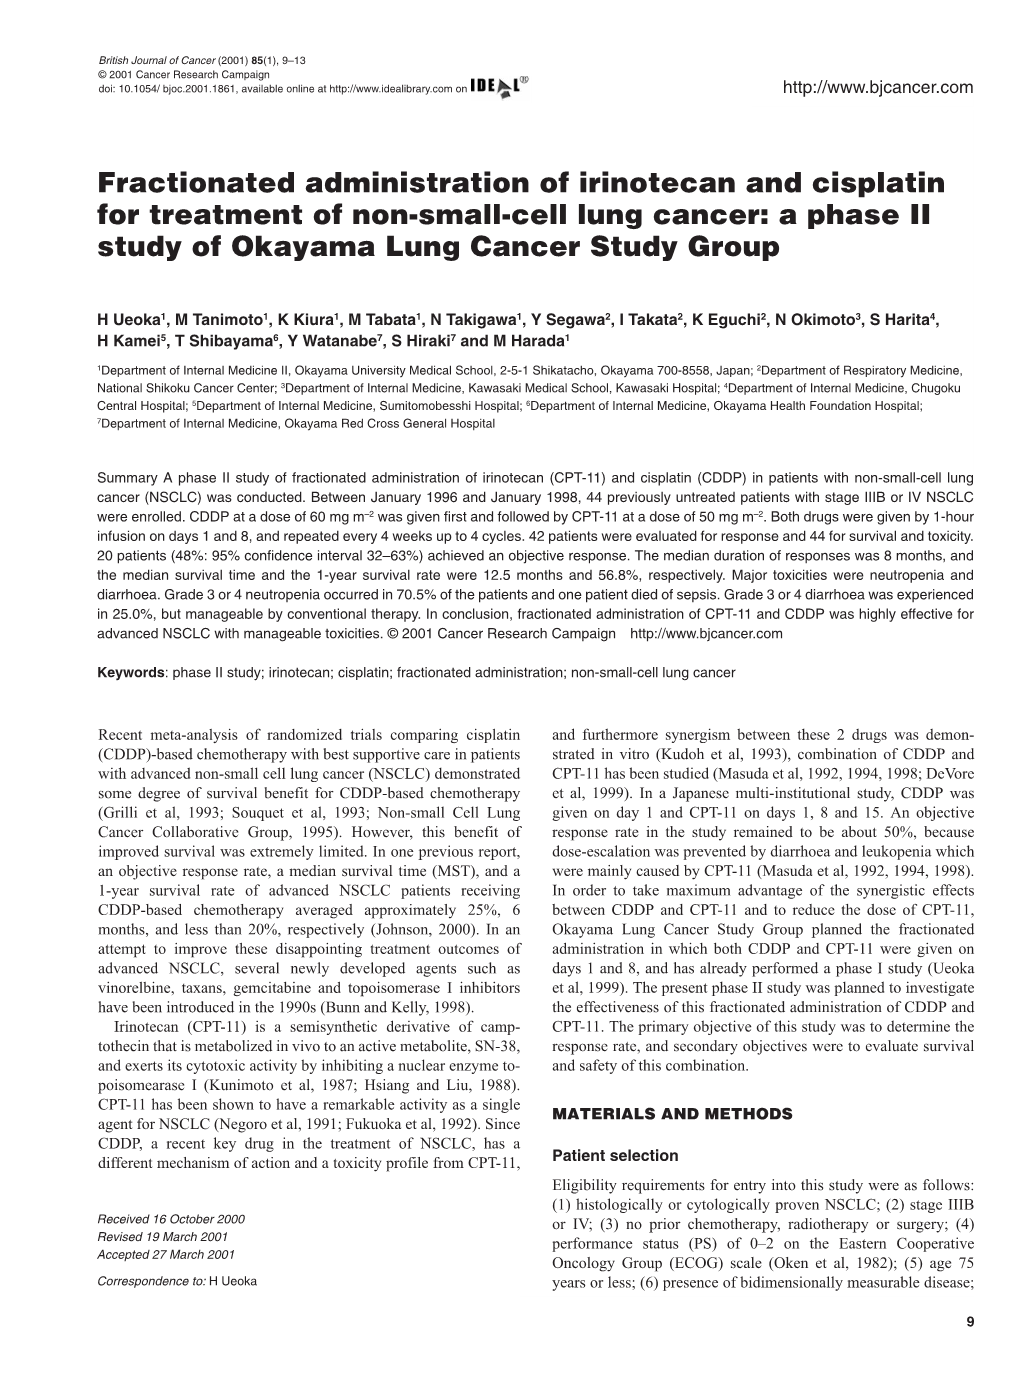 Fractionated Administration of Irinotecan and Cisplatin for Treatment of Non-Small-Cell Lung Cancer: a Phase II Study of Okayama Lung Cancer Study Group